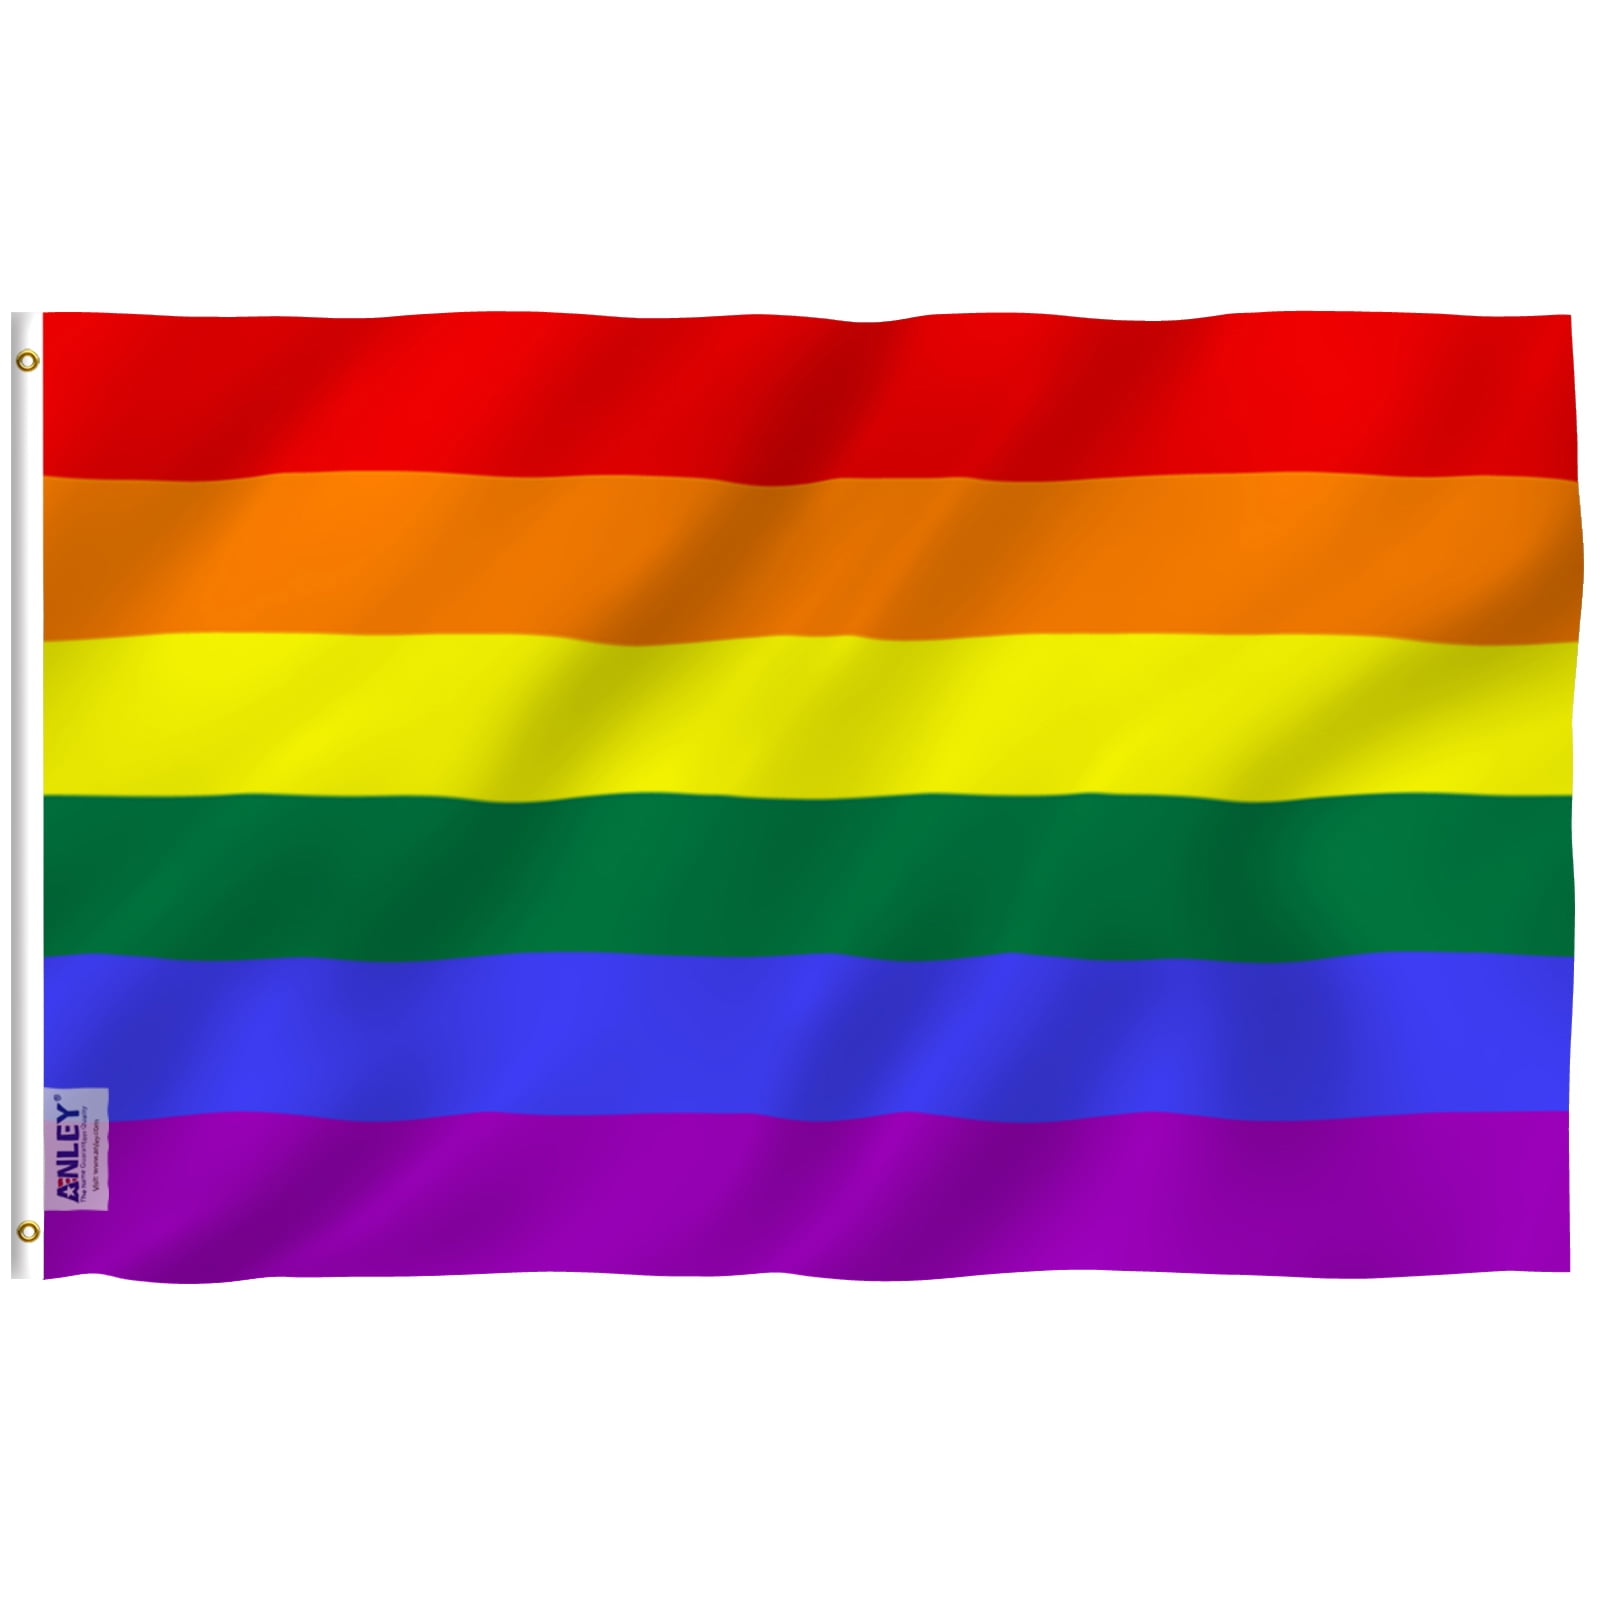 how many colors in the gay pride flag